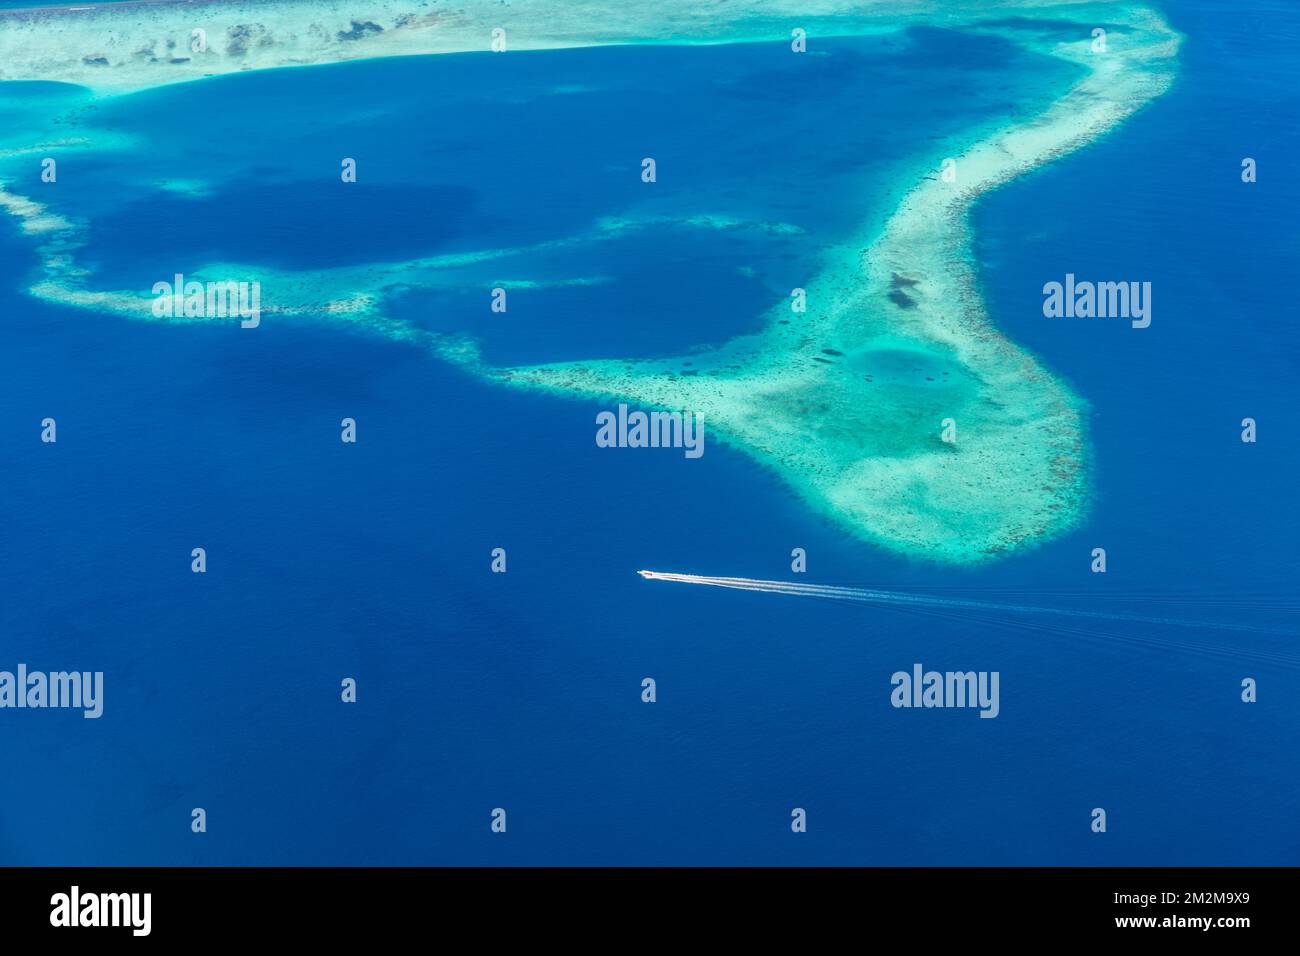 Aerial view of Maldives atolls islands with a speedboat, world top beauty. Maldives tourism, luxury travel destination aerial landscape, seascape Stock Photo